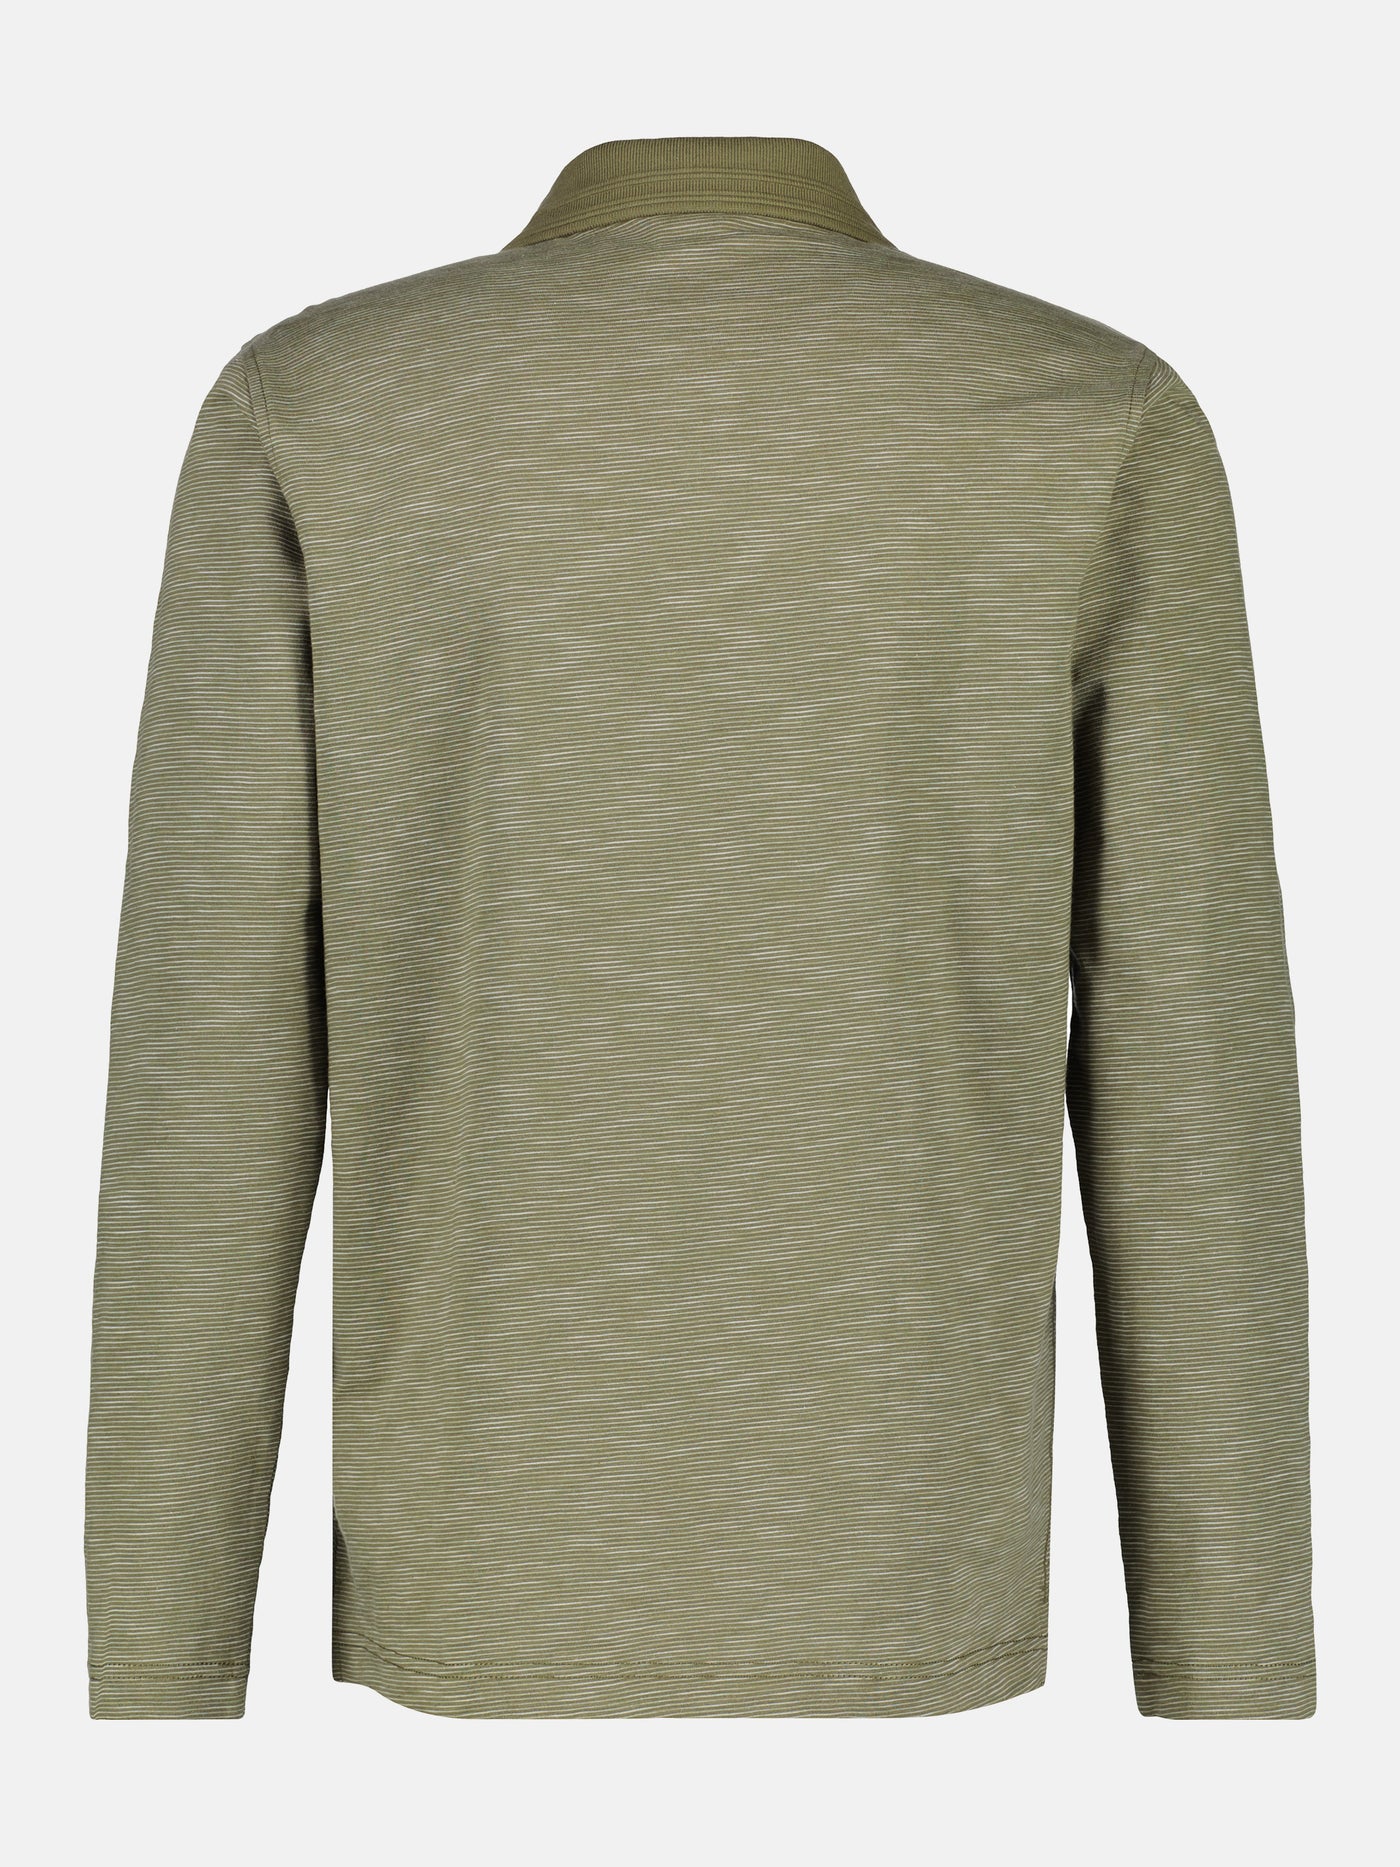 Long-sleeved polo shirt with fineliner stripes